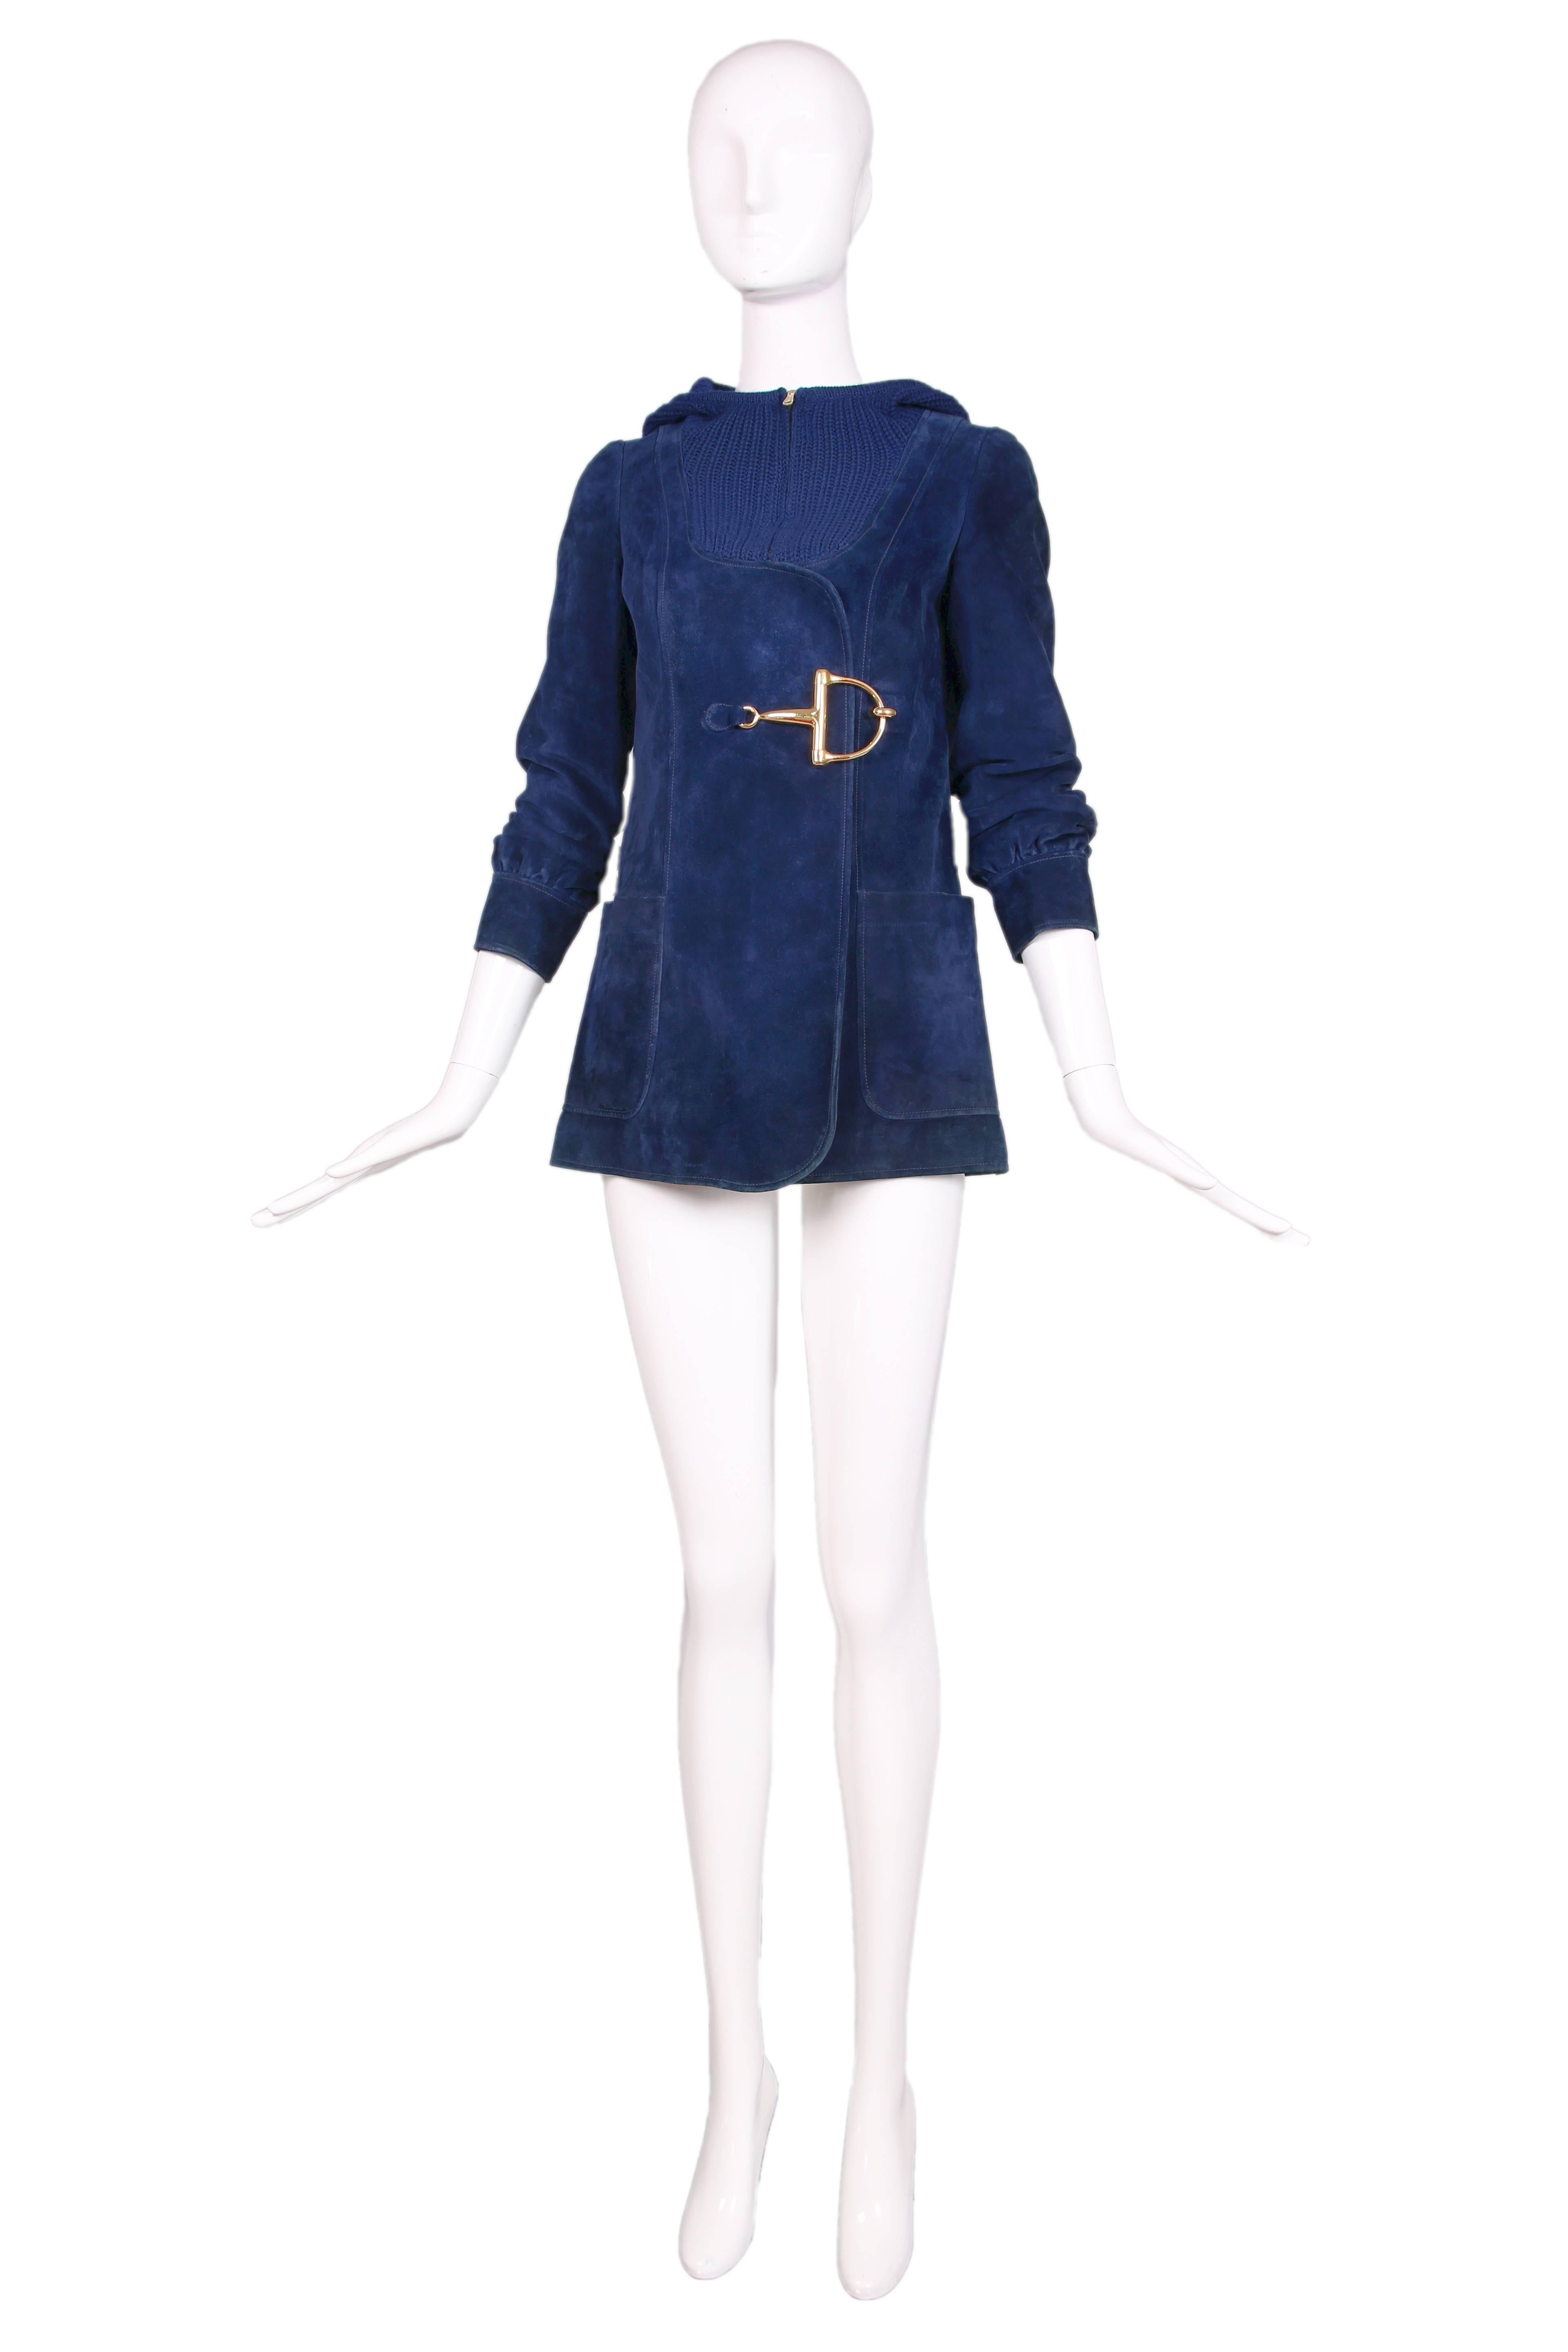 Vintage Gucci blue suede jacket with a chunky knit wool hood that dips into the bodice front. Features an over-sized gold-toned classic Gucci horsebit clasp closure at the front and two frontal pockets. Fully lined in white silk fabric with